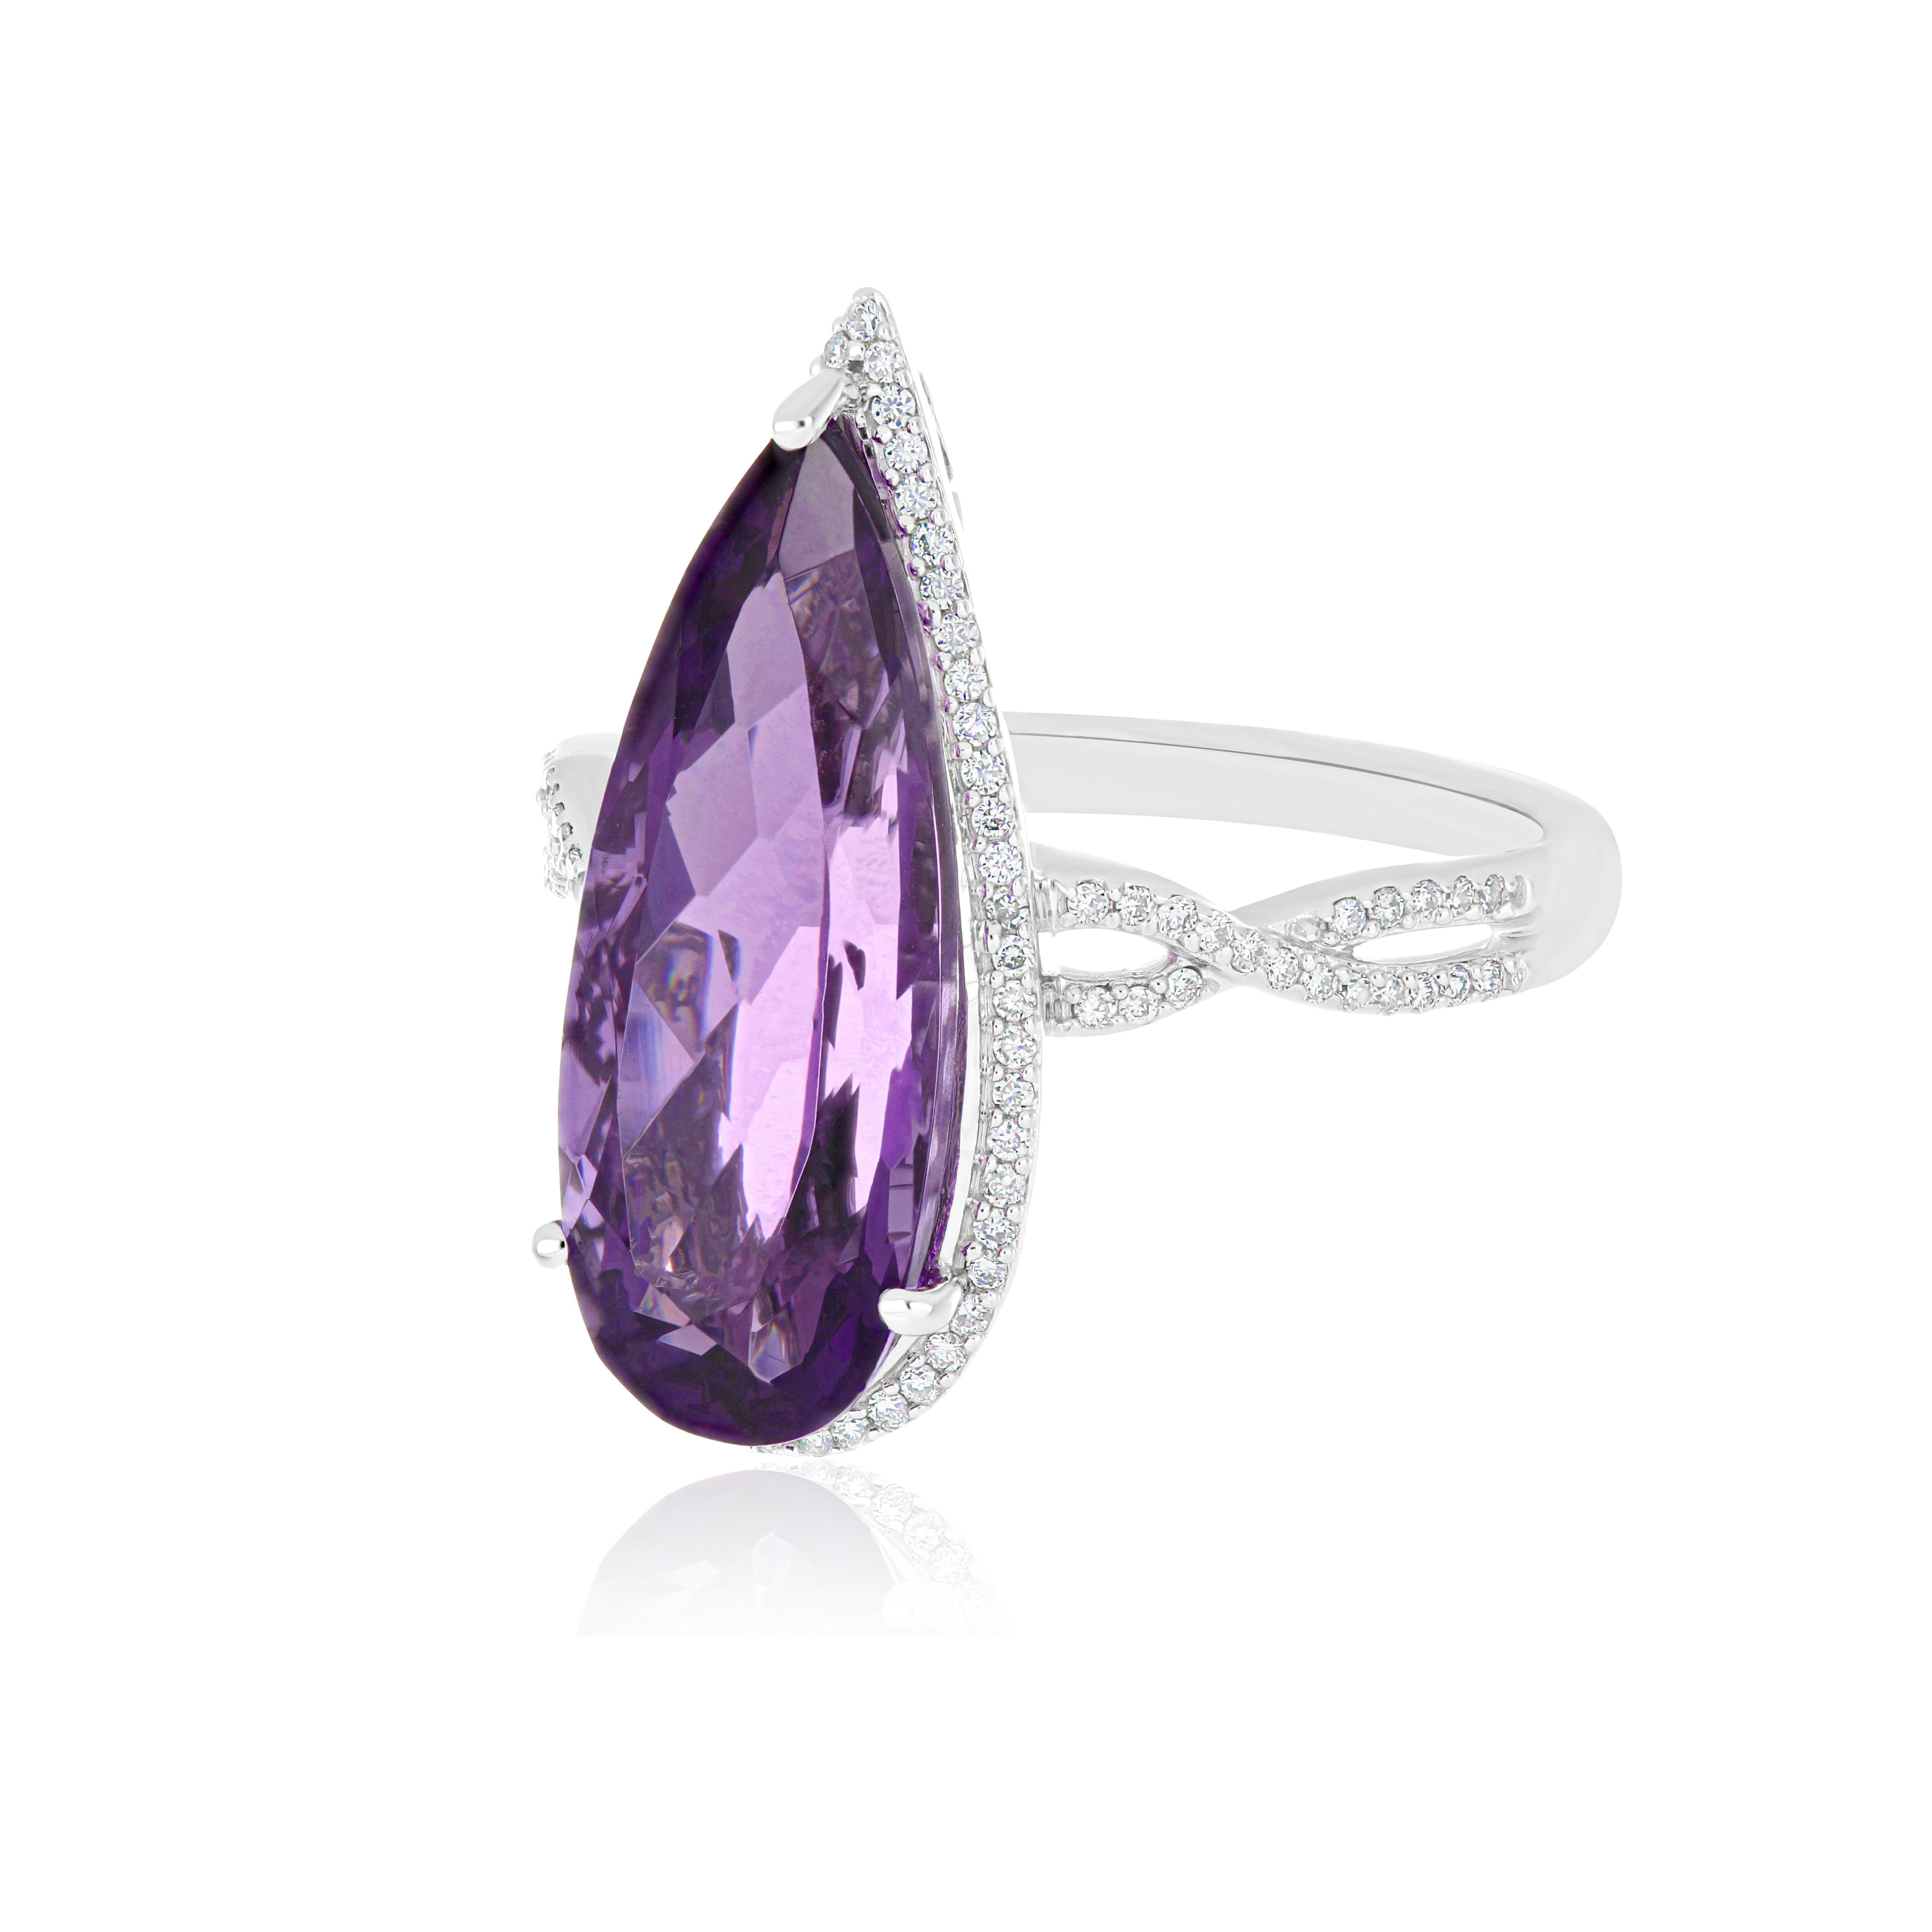 For Sale:  6.11 Carat Amethyst and Diamond Ring in 14 Karat White Gold Ring  3